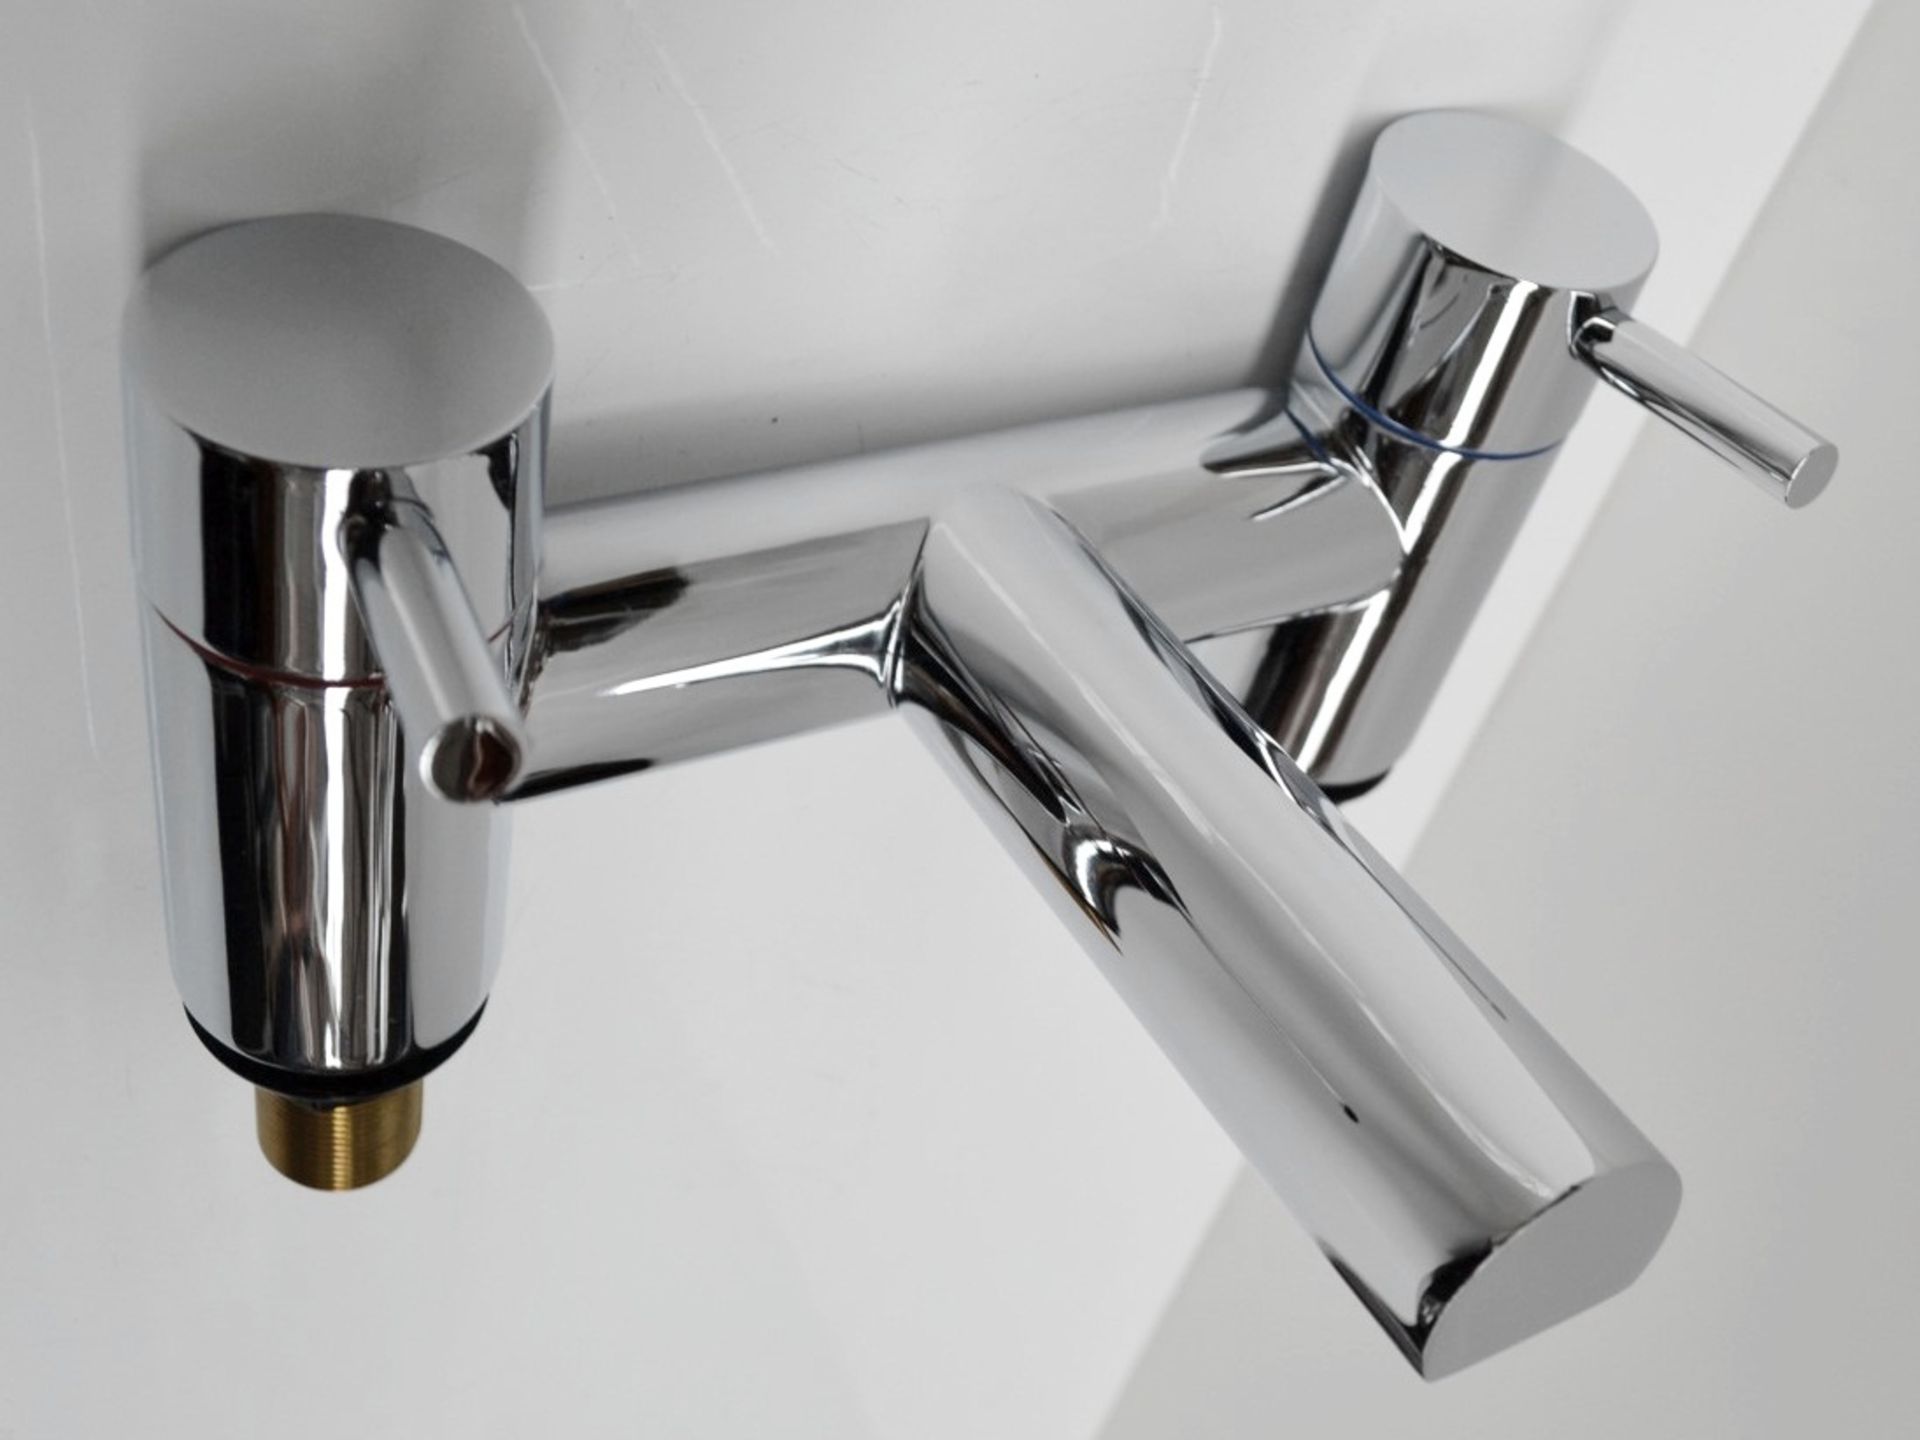 1 x Matrix Bath Mixer Tap - Featuring Modern Style With A Round Shape - Ref: MBI028 - CL190 - Unused - Image 2 of 4